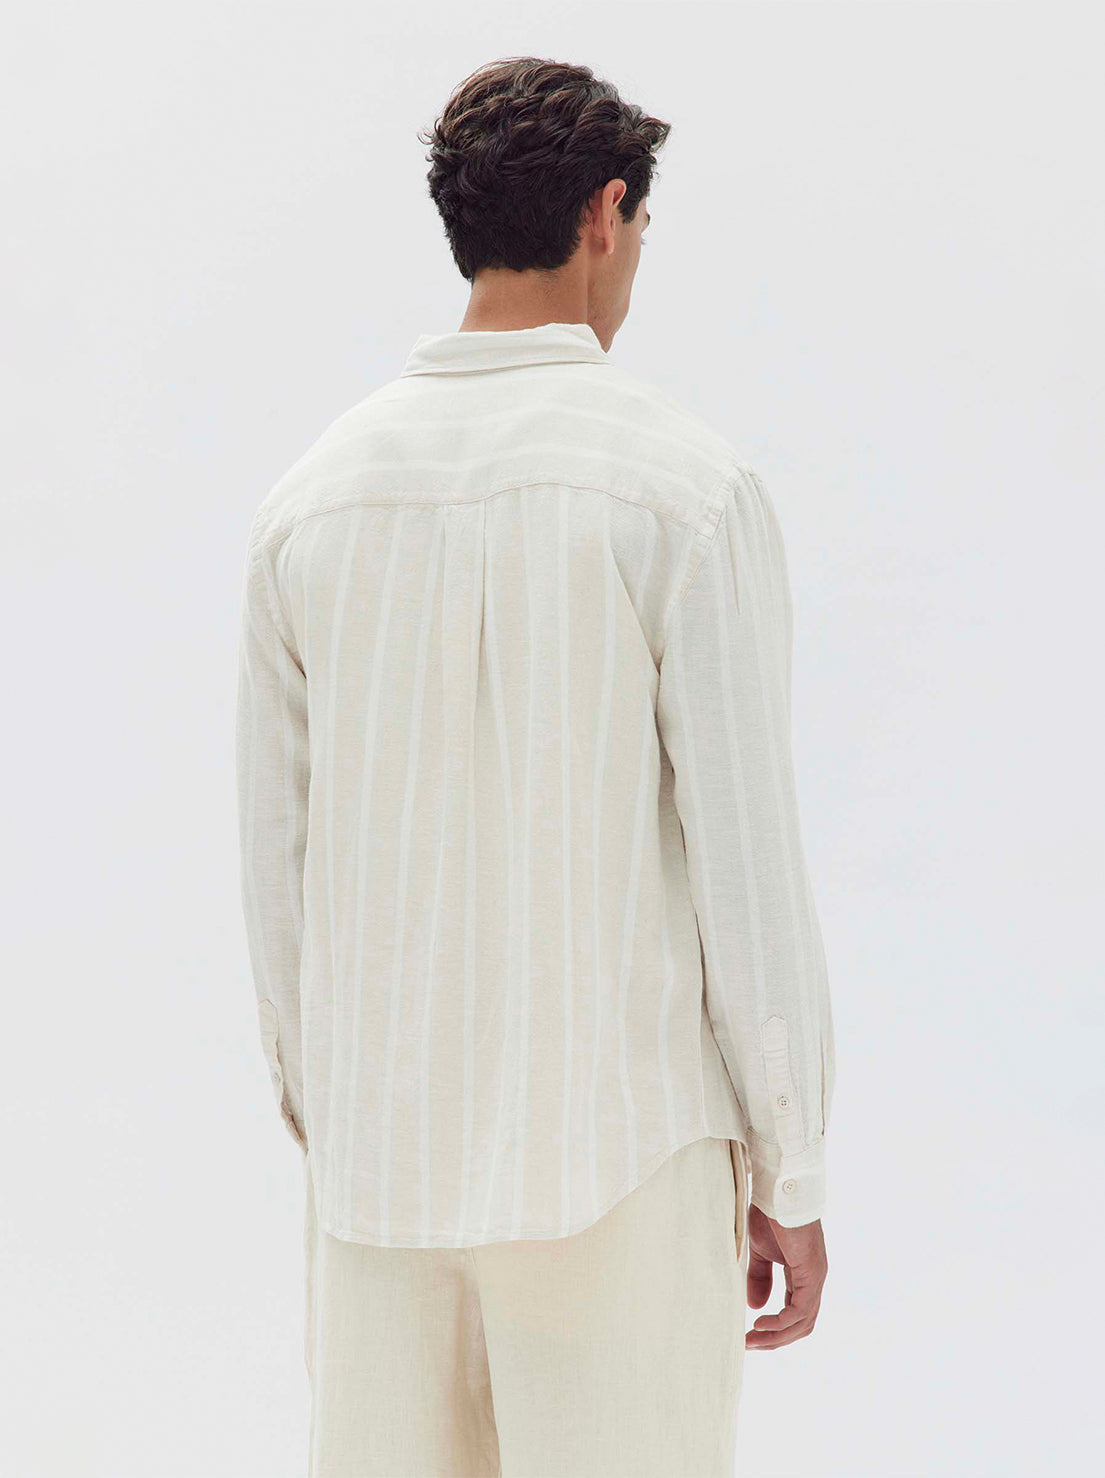 Assembly Label | Theo Long Sleeve Shirt - Sand Stripe